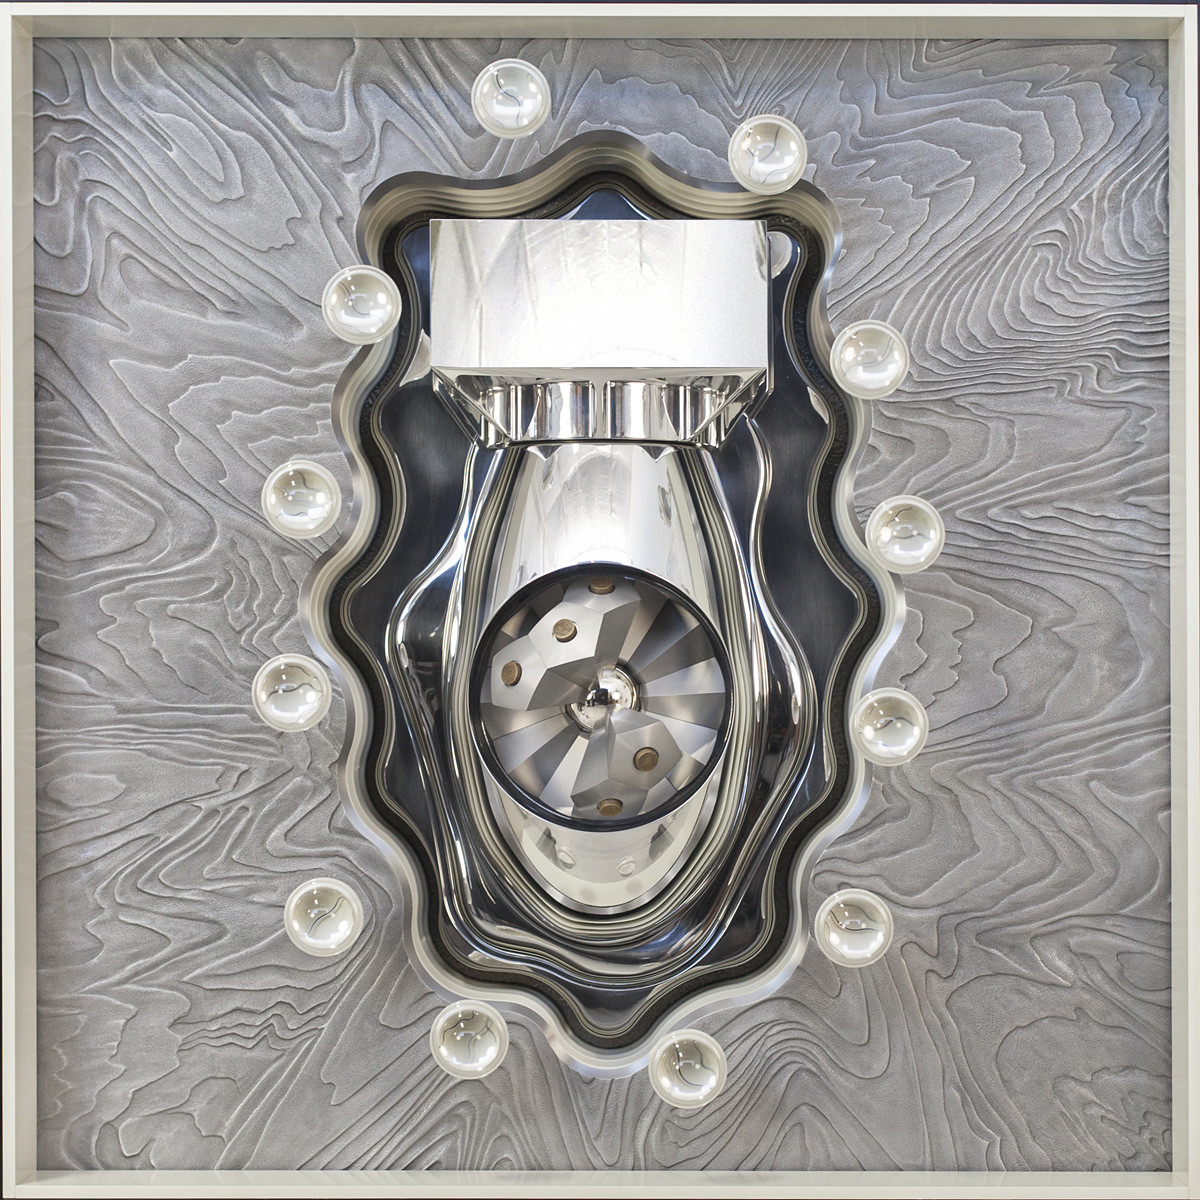 Fat Man and Little Boy, 2013 <b>Diptych<br />
( left )<br />
Aluminum, stainless steel, brass, nickel, acrylic, paint, anodize<br />
43" x 44" x 12"</b>